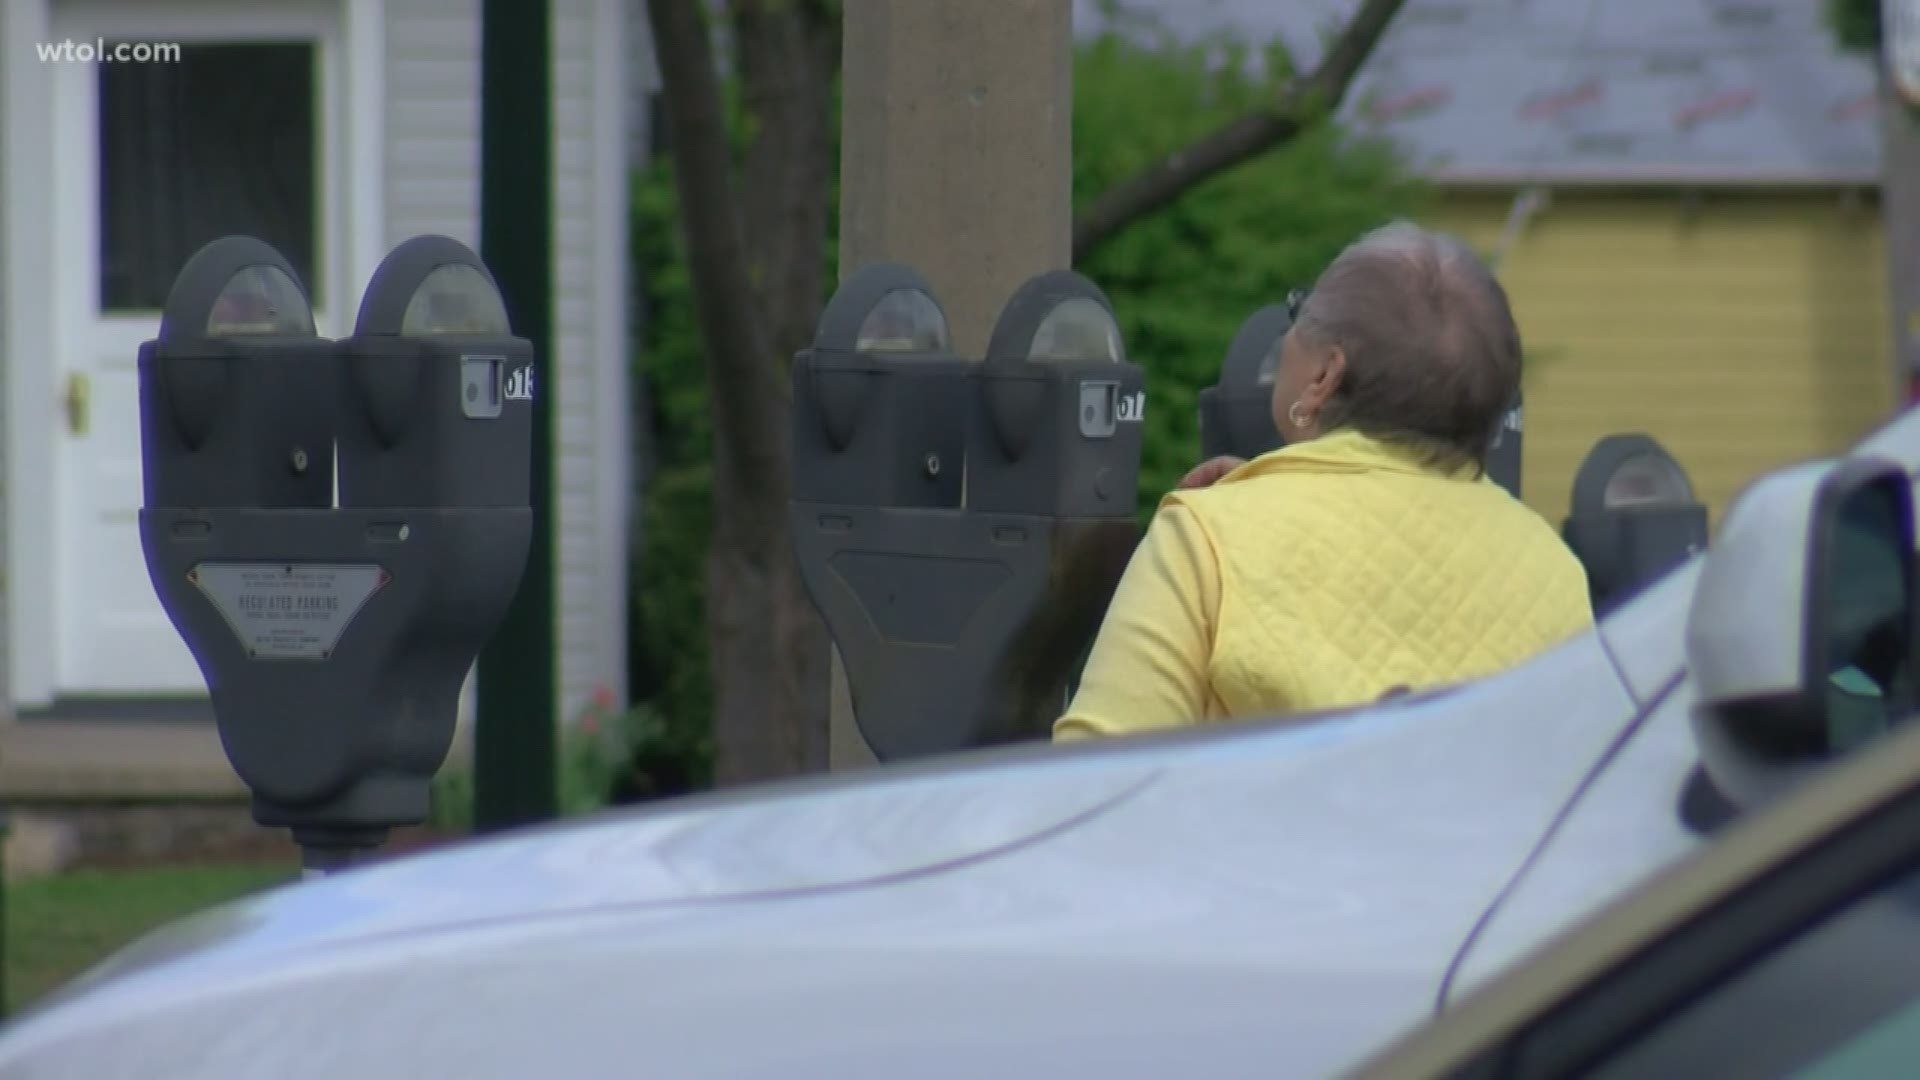 Drivers were supposed to start paying for parking in downtown BG as soon as the year started, but a hold-up in the paying kiosks has delayed the change.